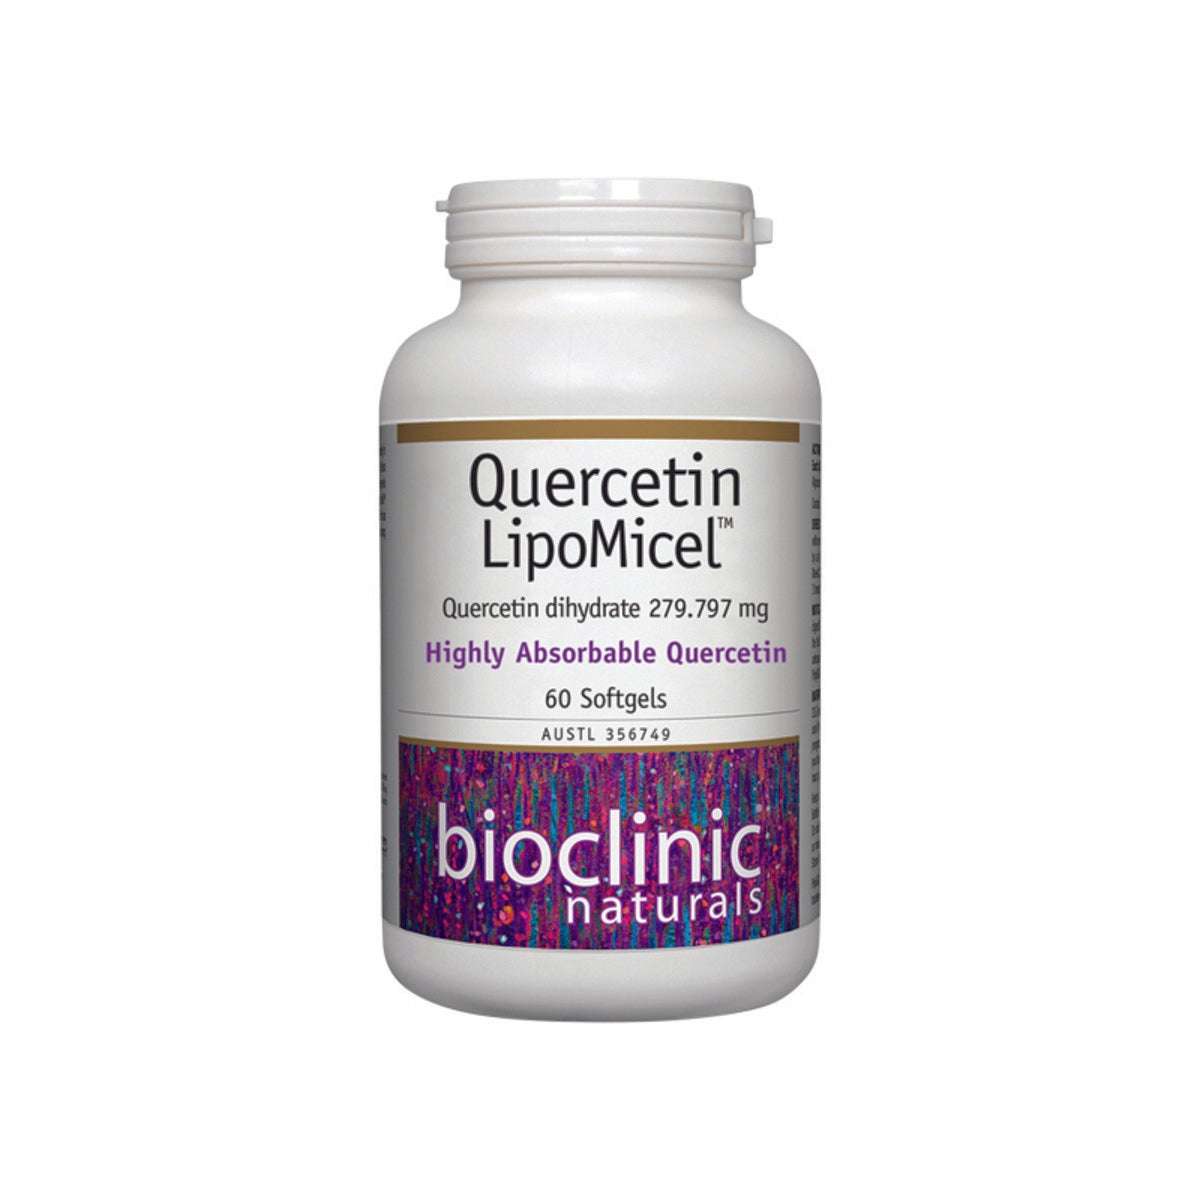 image of Bioclinic Naturals Quercetin LipoMicel 60c with a white background